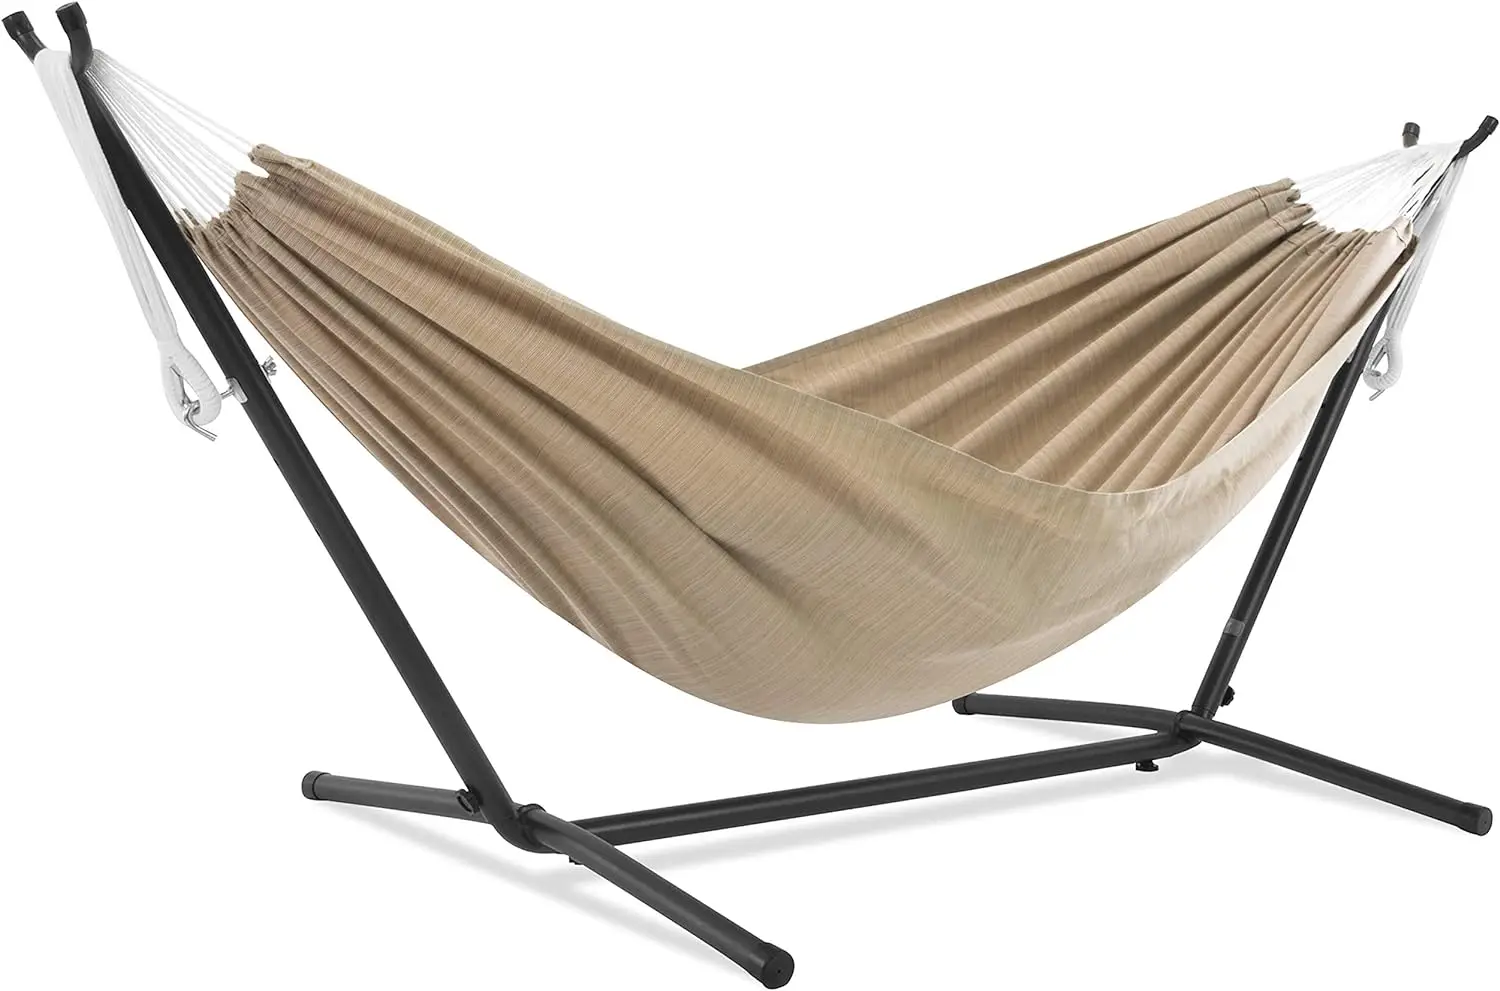 

Double Sunbrella® Hammock with Space Saving Steel Stand, Sand (450 lb Capacity - Premium Carry Bag Included)